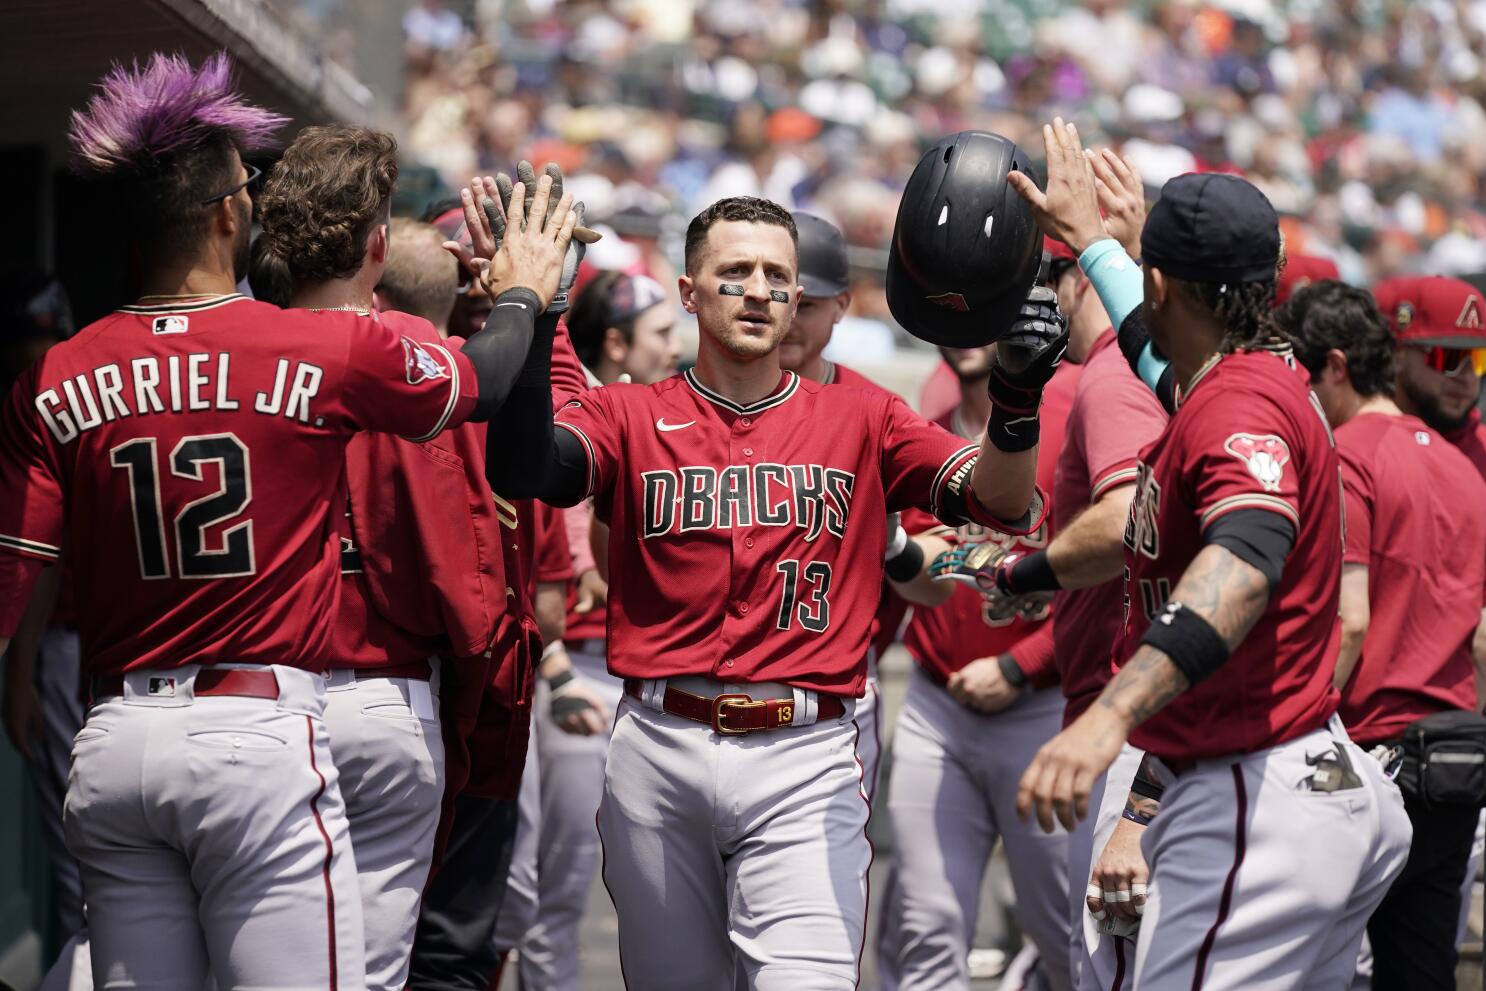 Reds 8, Tigers 4, 13 innings  Frazier wins game with walk-off grand slam